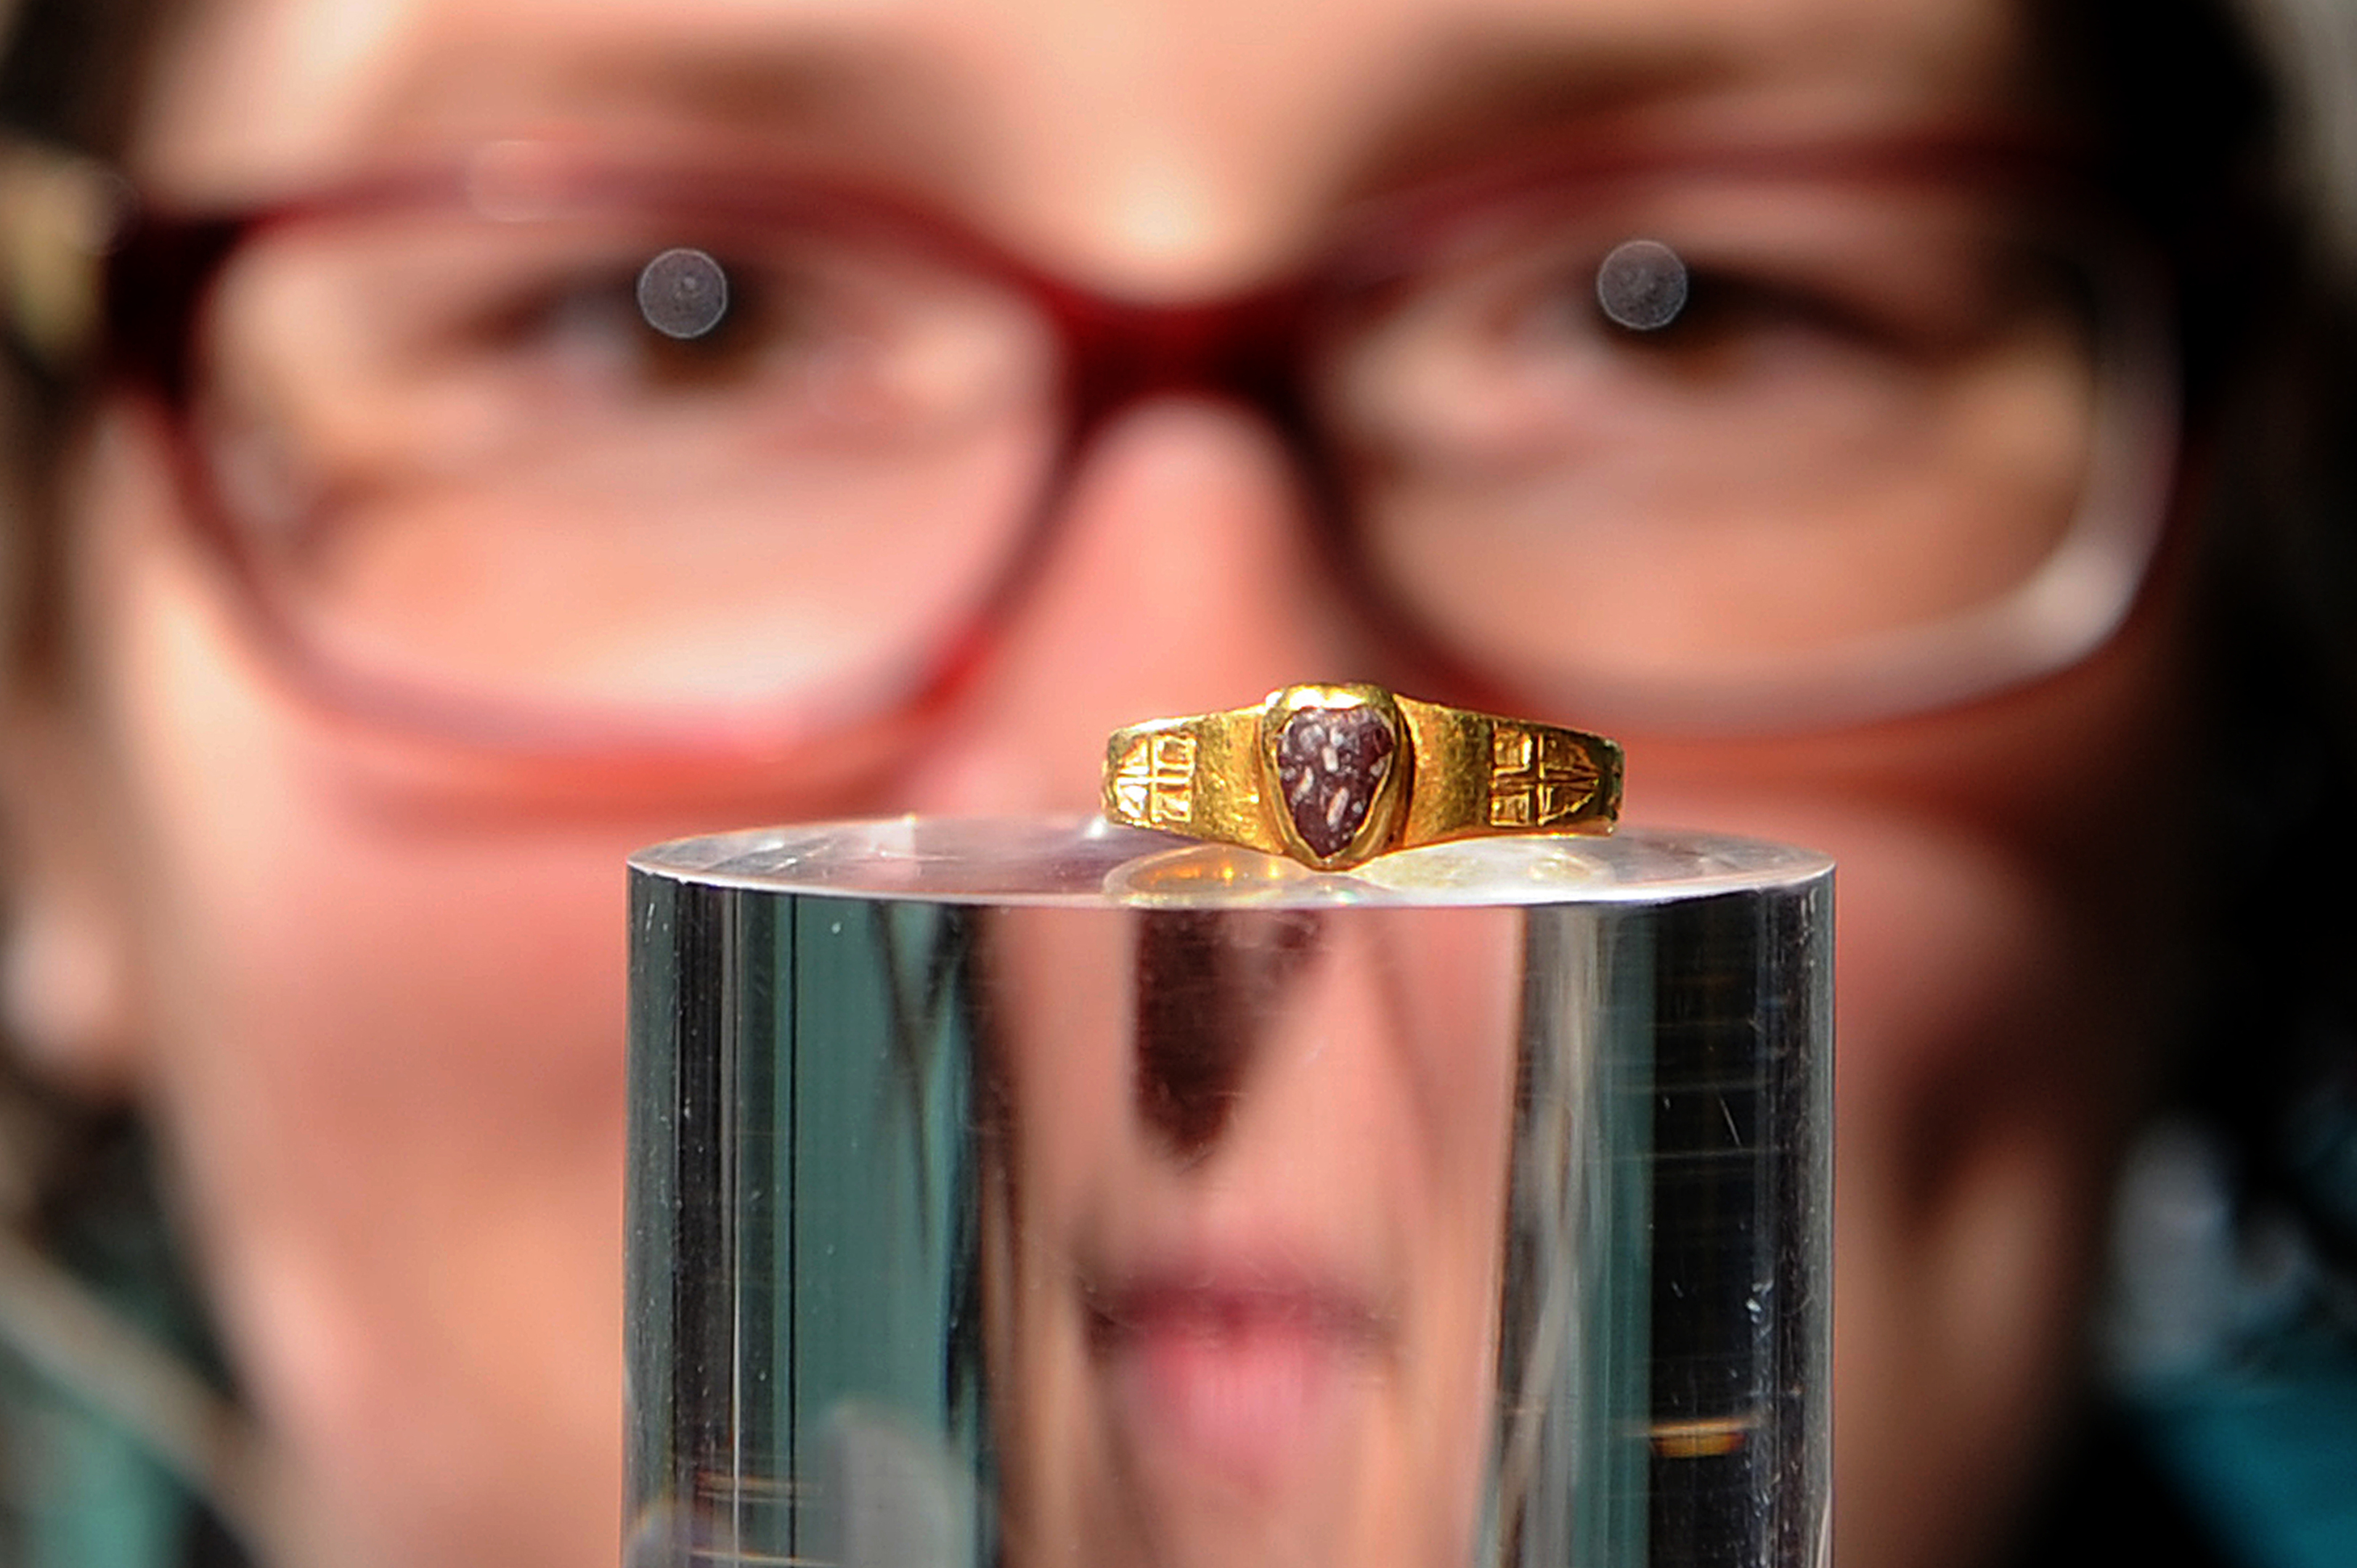 Museum assistant Jen Falconer inspects the ring.